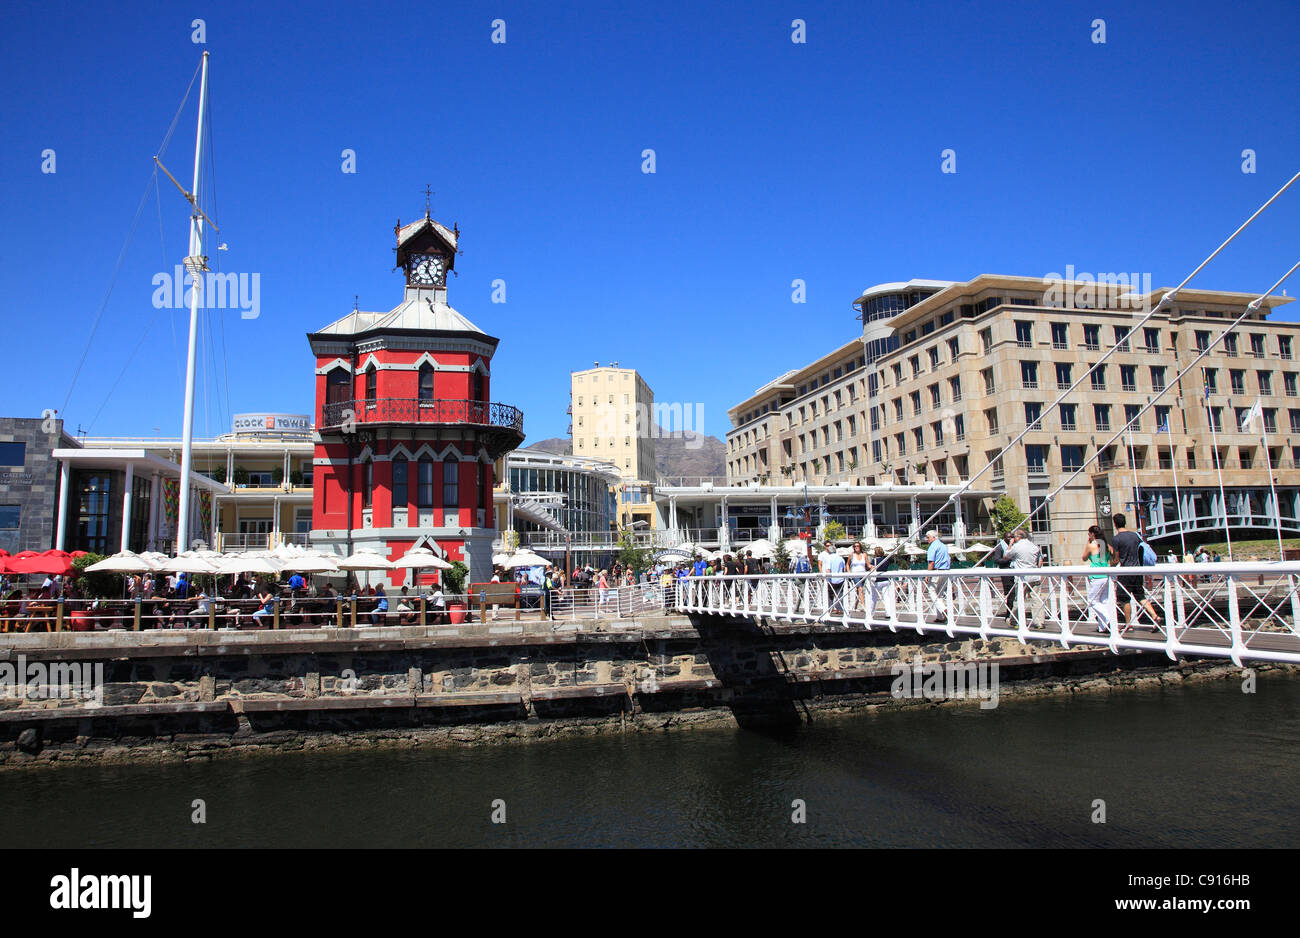 The Red Clock tower is a landmark and meeting point in Victoria and Albert Dock on the harbour quayside in Cape  Town. Stock Photo